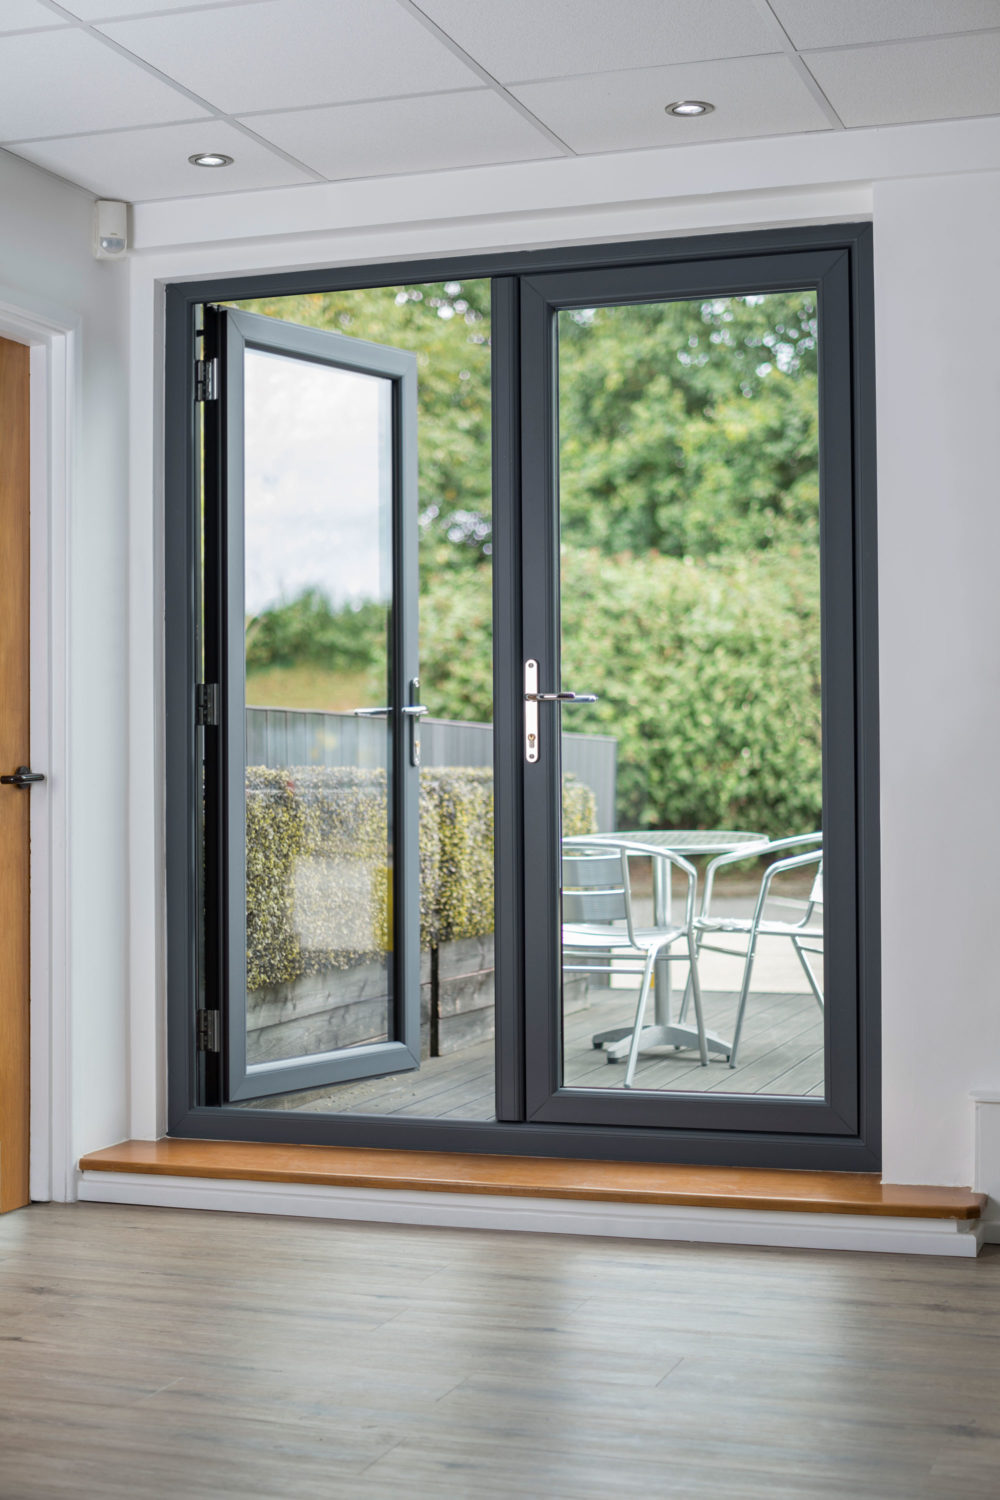 Why Choose a uPVC Product?